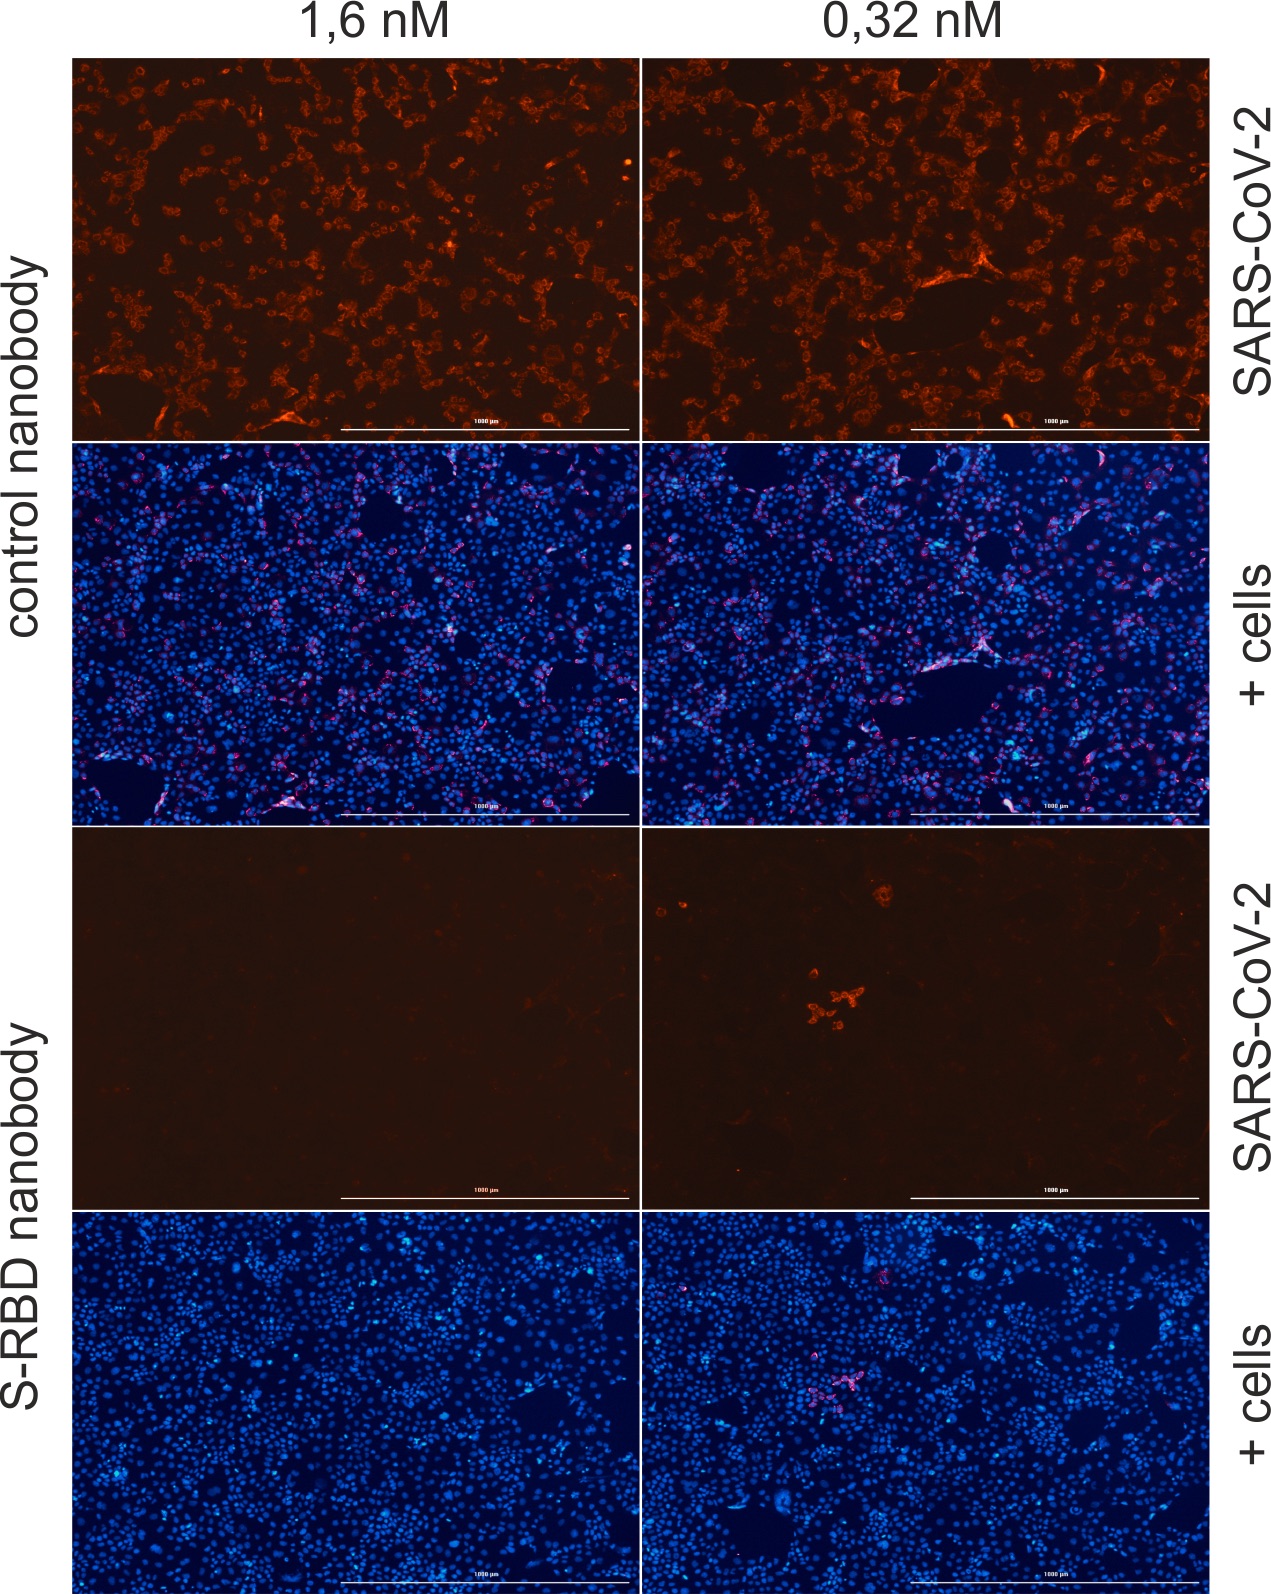 Fluorescence microscopy sections of differently stained human epithelial cells arranged side by side in two columns. The top row shows red stained cells, as the virus was able to enter, the row below shows the corresponding blue cell nuclei. The third row shows unstained cells because the virus was prevented by the nanobody from entering. The fourth row shows the corresponding cell nuclei.